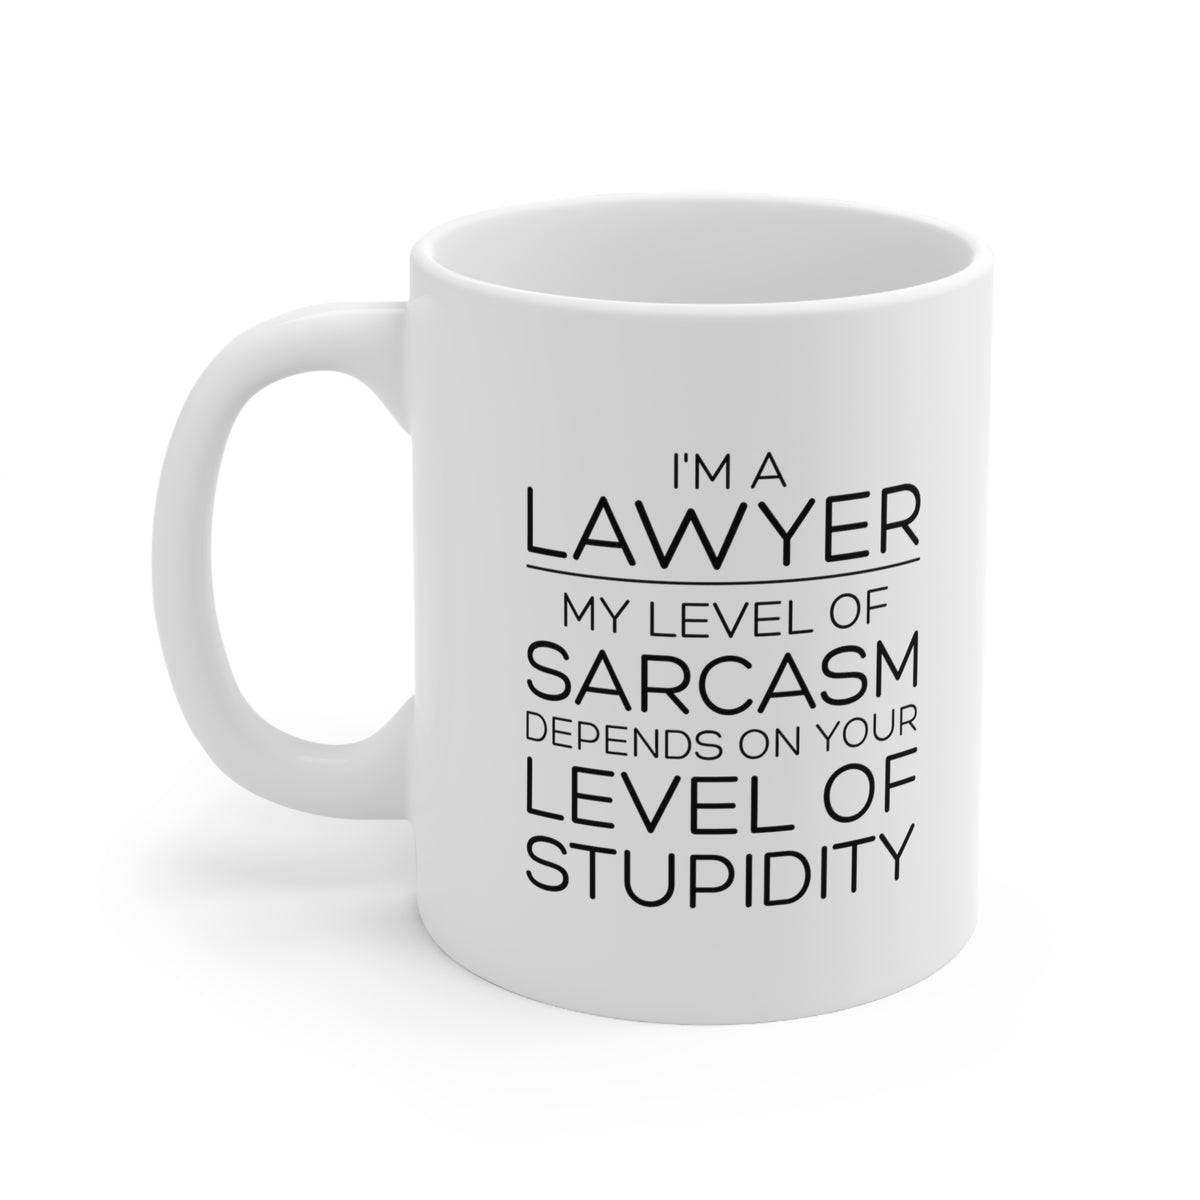 Funny Lawyer Coffee Mug, I'm A Lawyer Sarcasm Novelty Cup, Lawyer Gifts For Women Men, Best Future New Attorney Mug, Unique Graduation Birthday Christmas Gifts For Lawyer